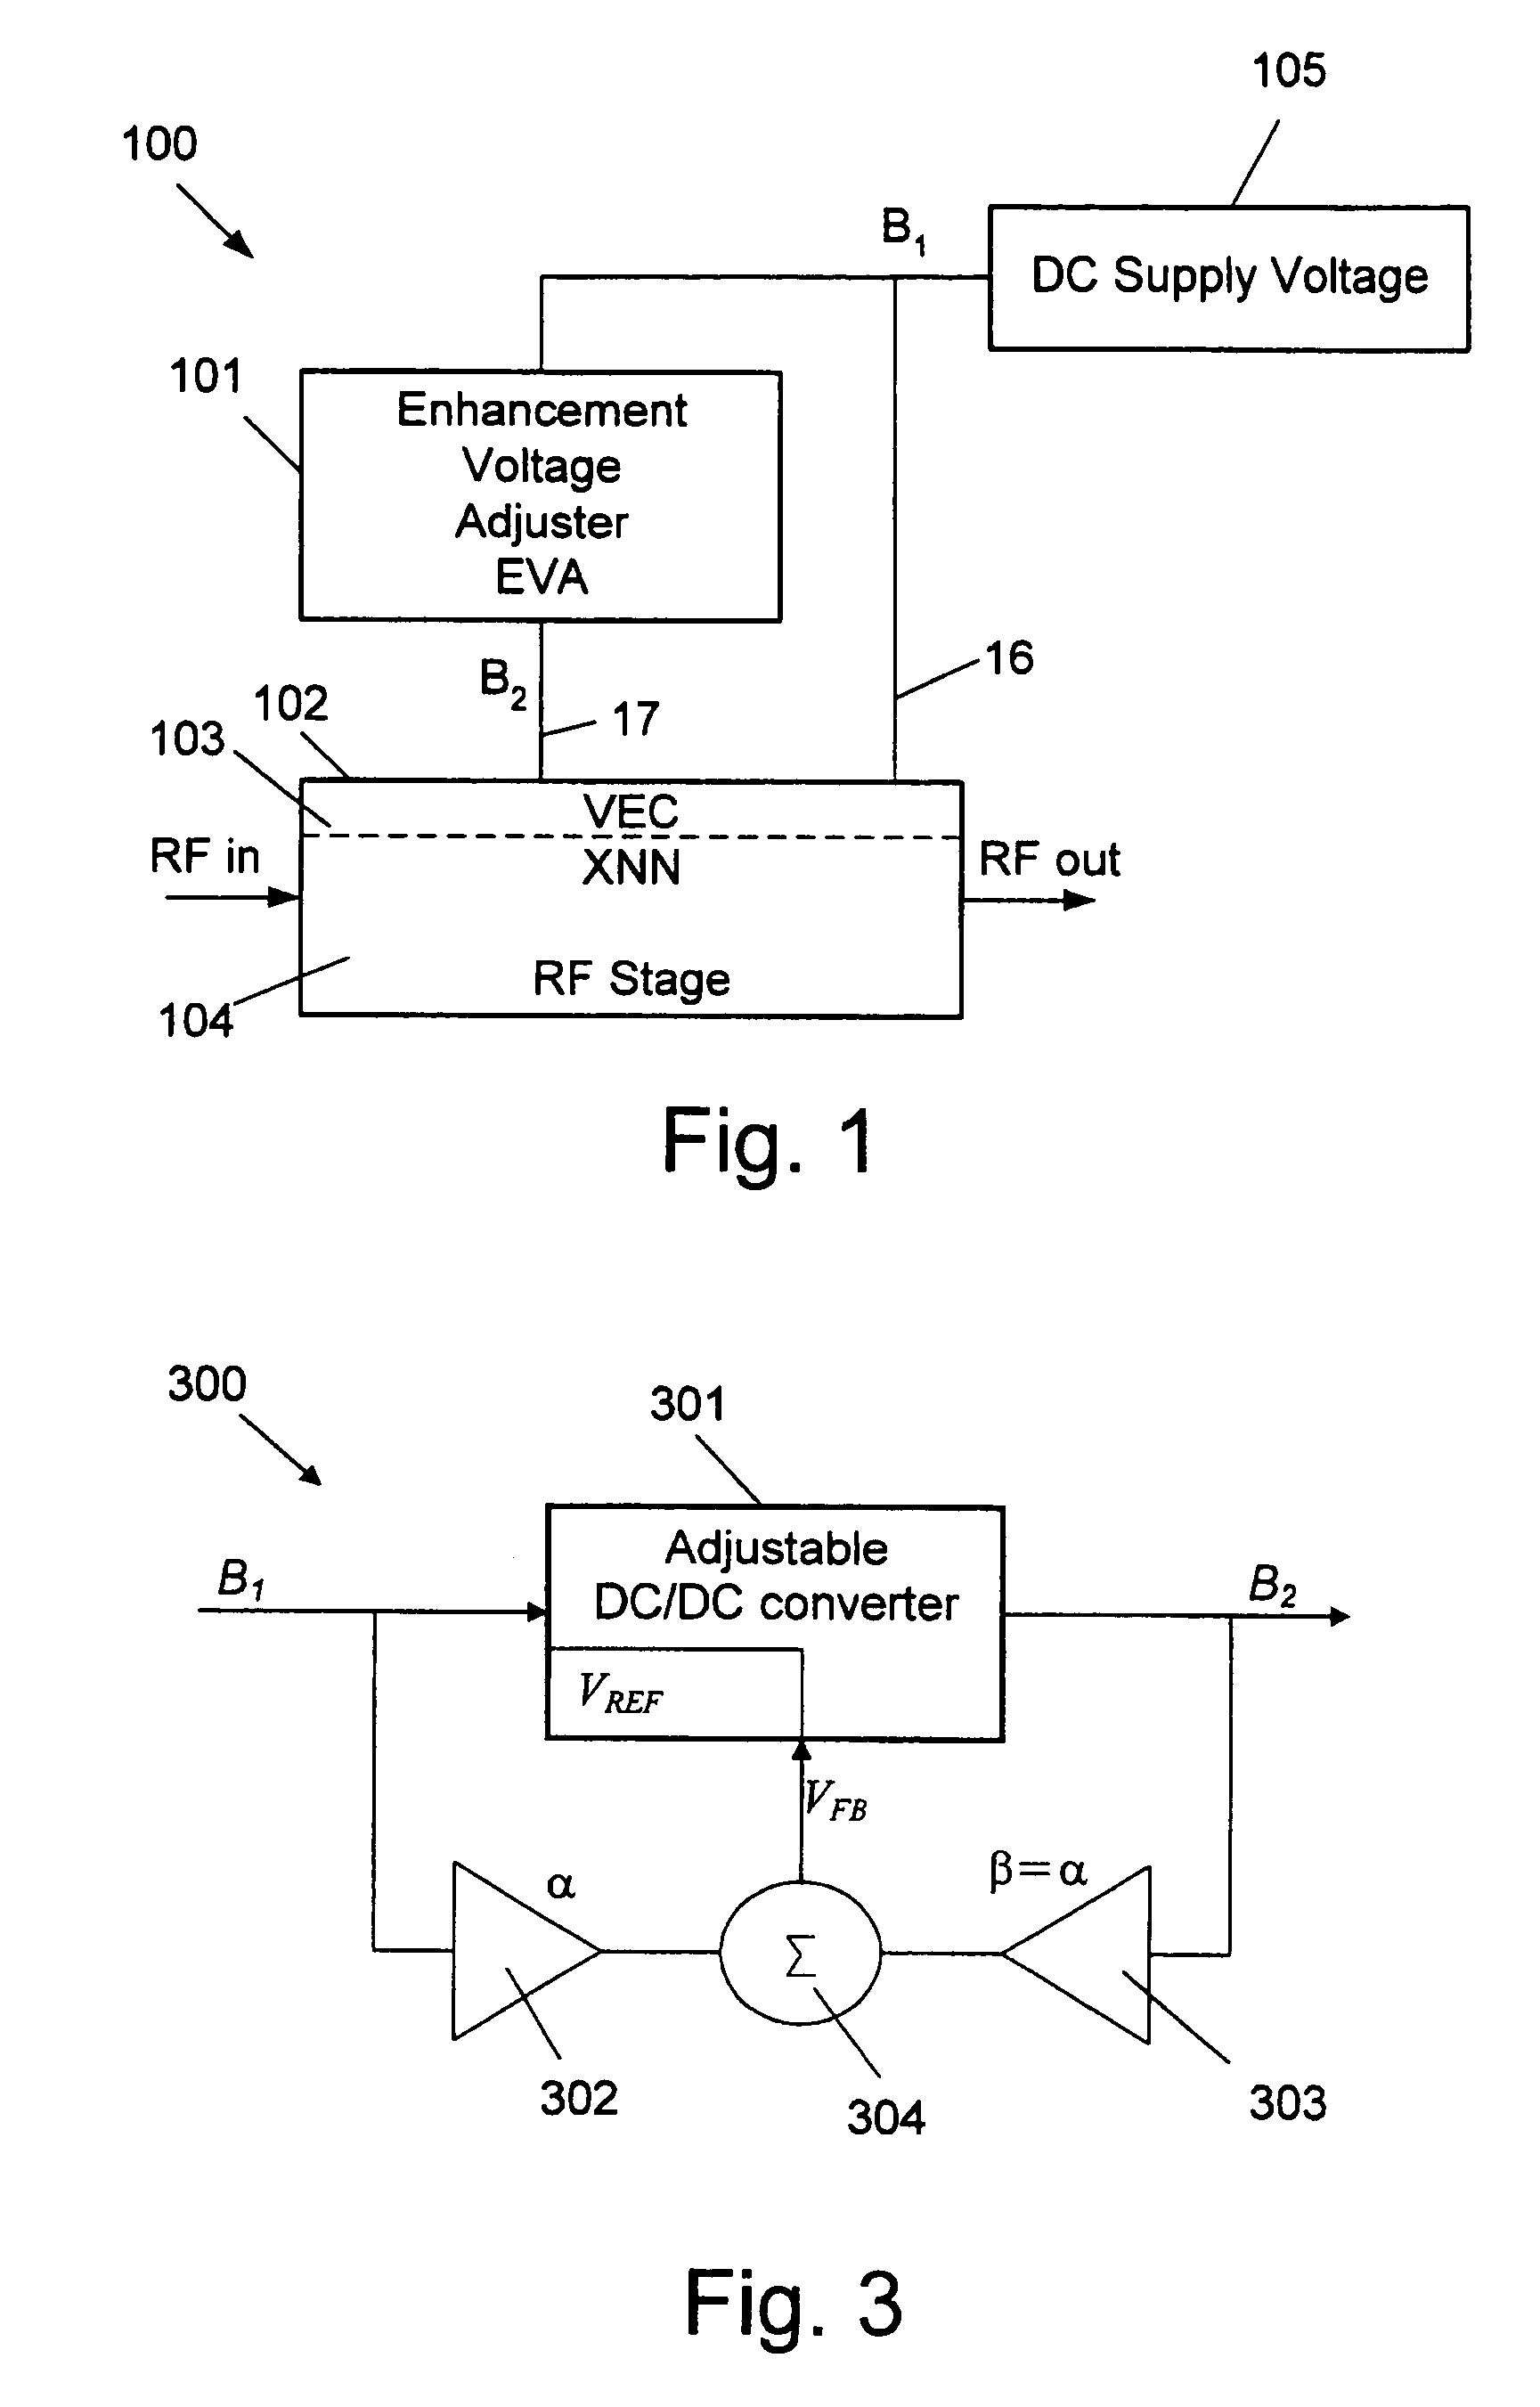 Method and apparatus for providing a stable power output of power amplifiers, operating under unstable supply voltage conditions